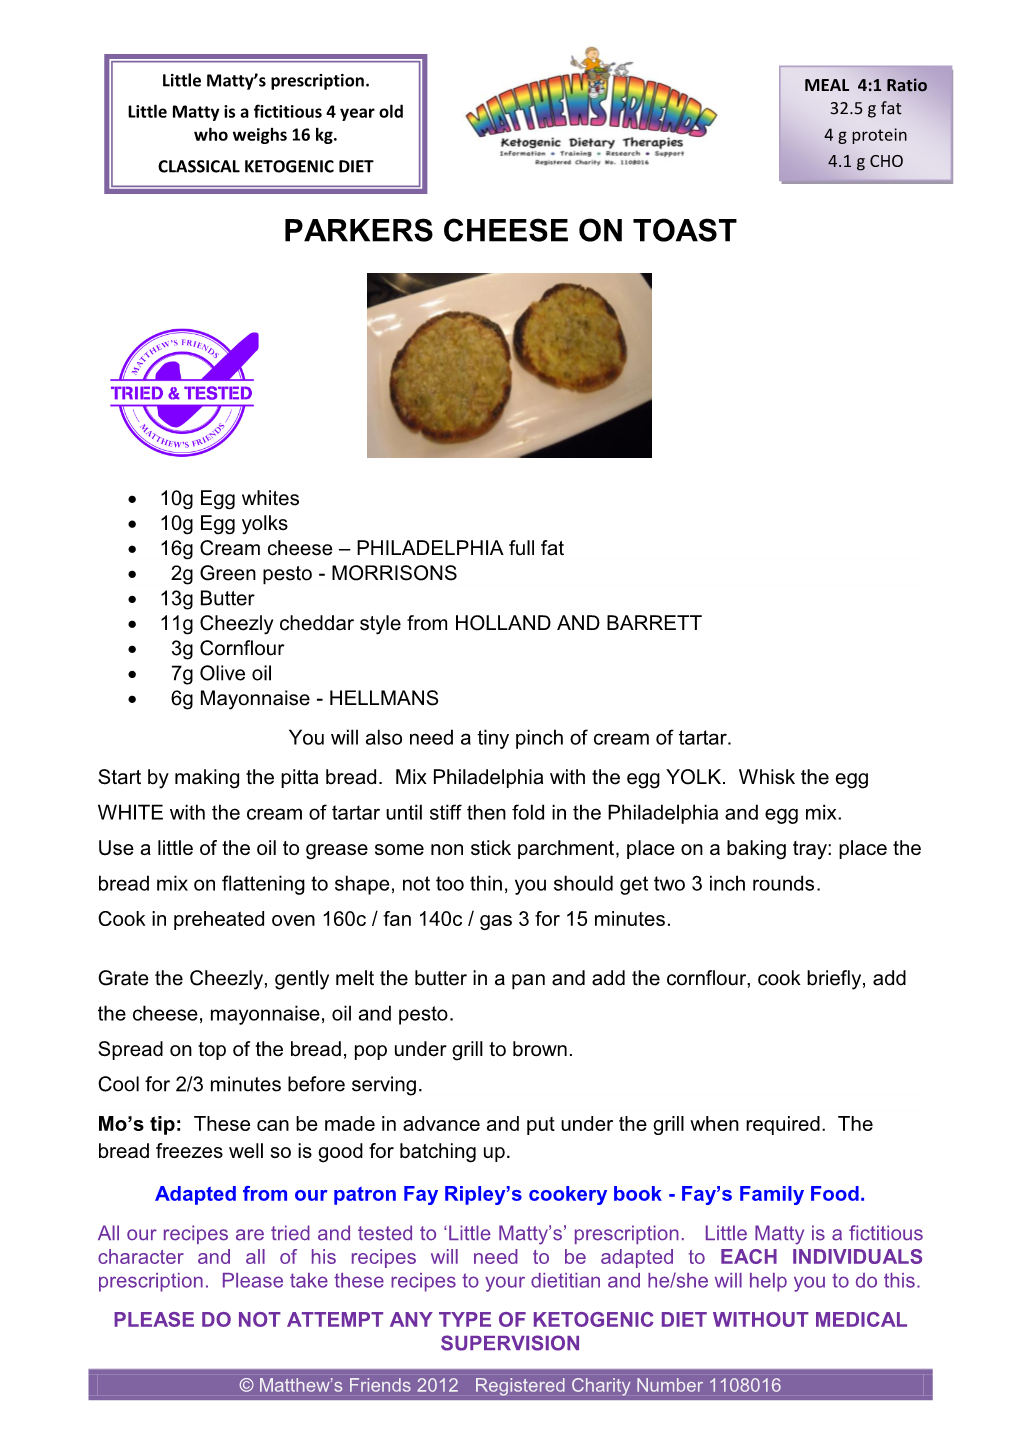 Parkers Cheese on Toast